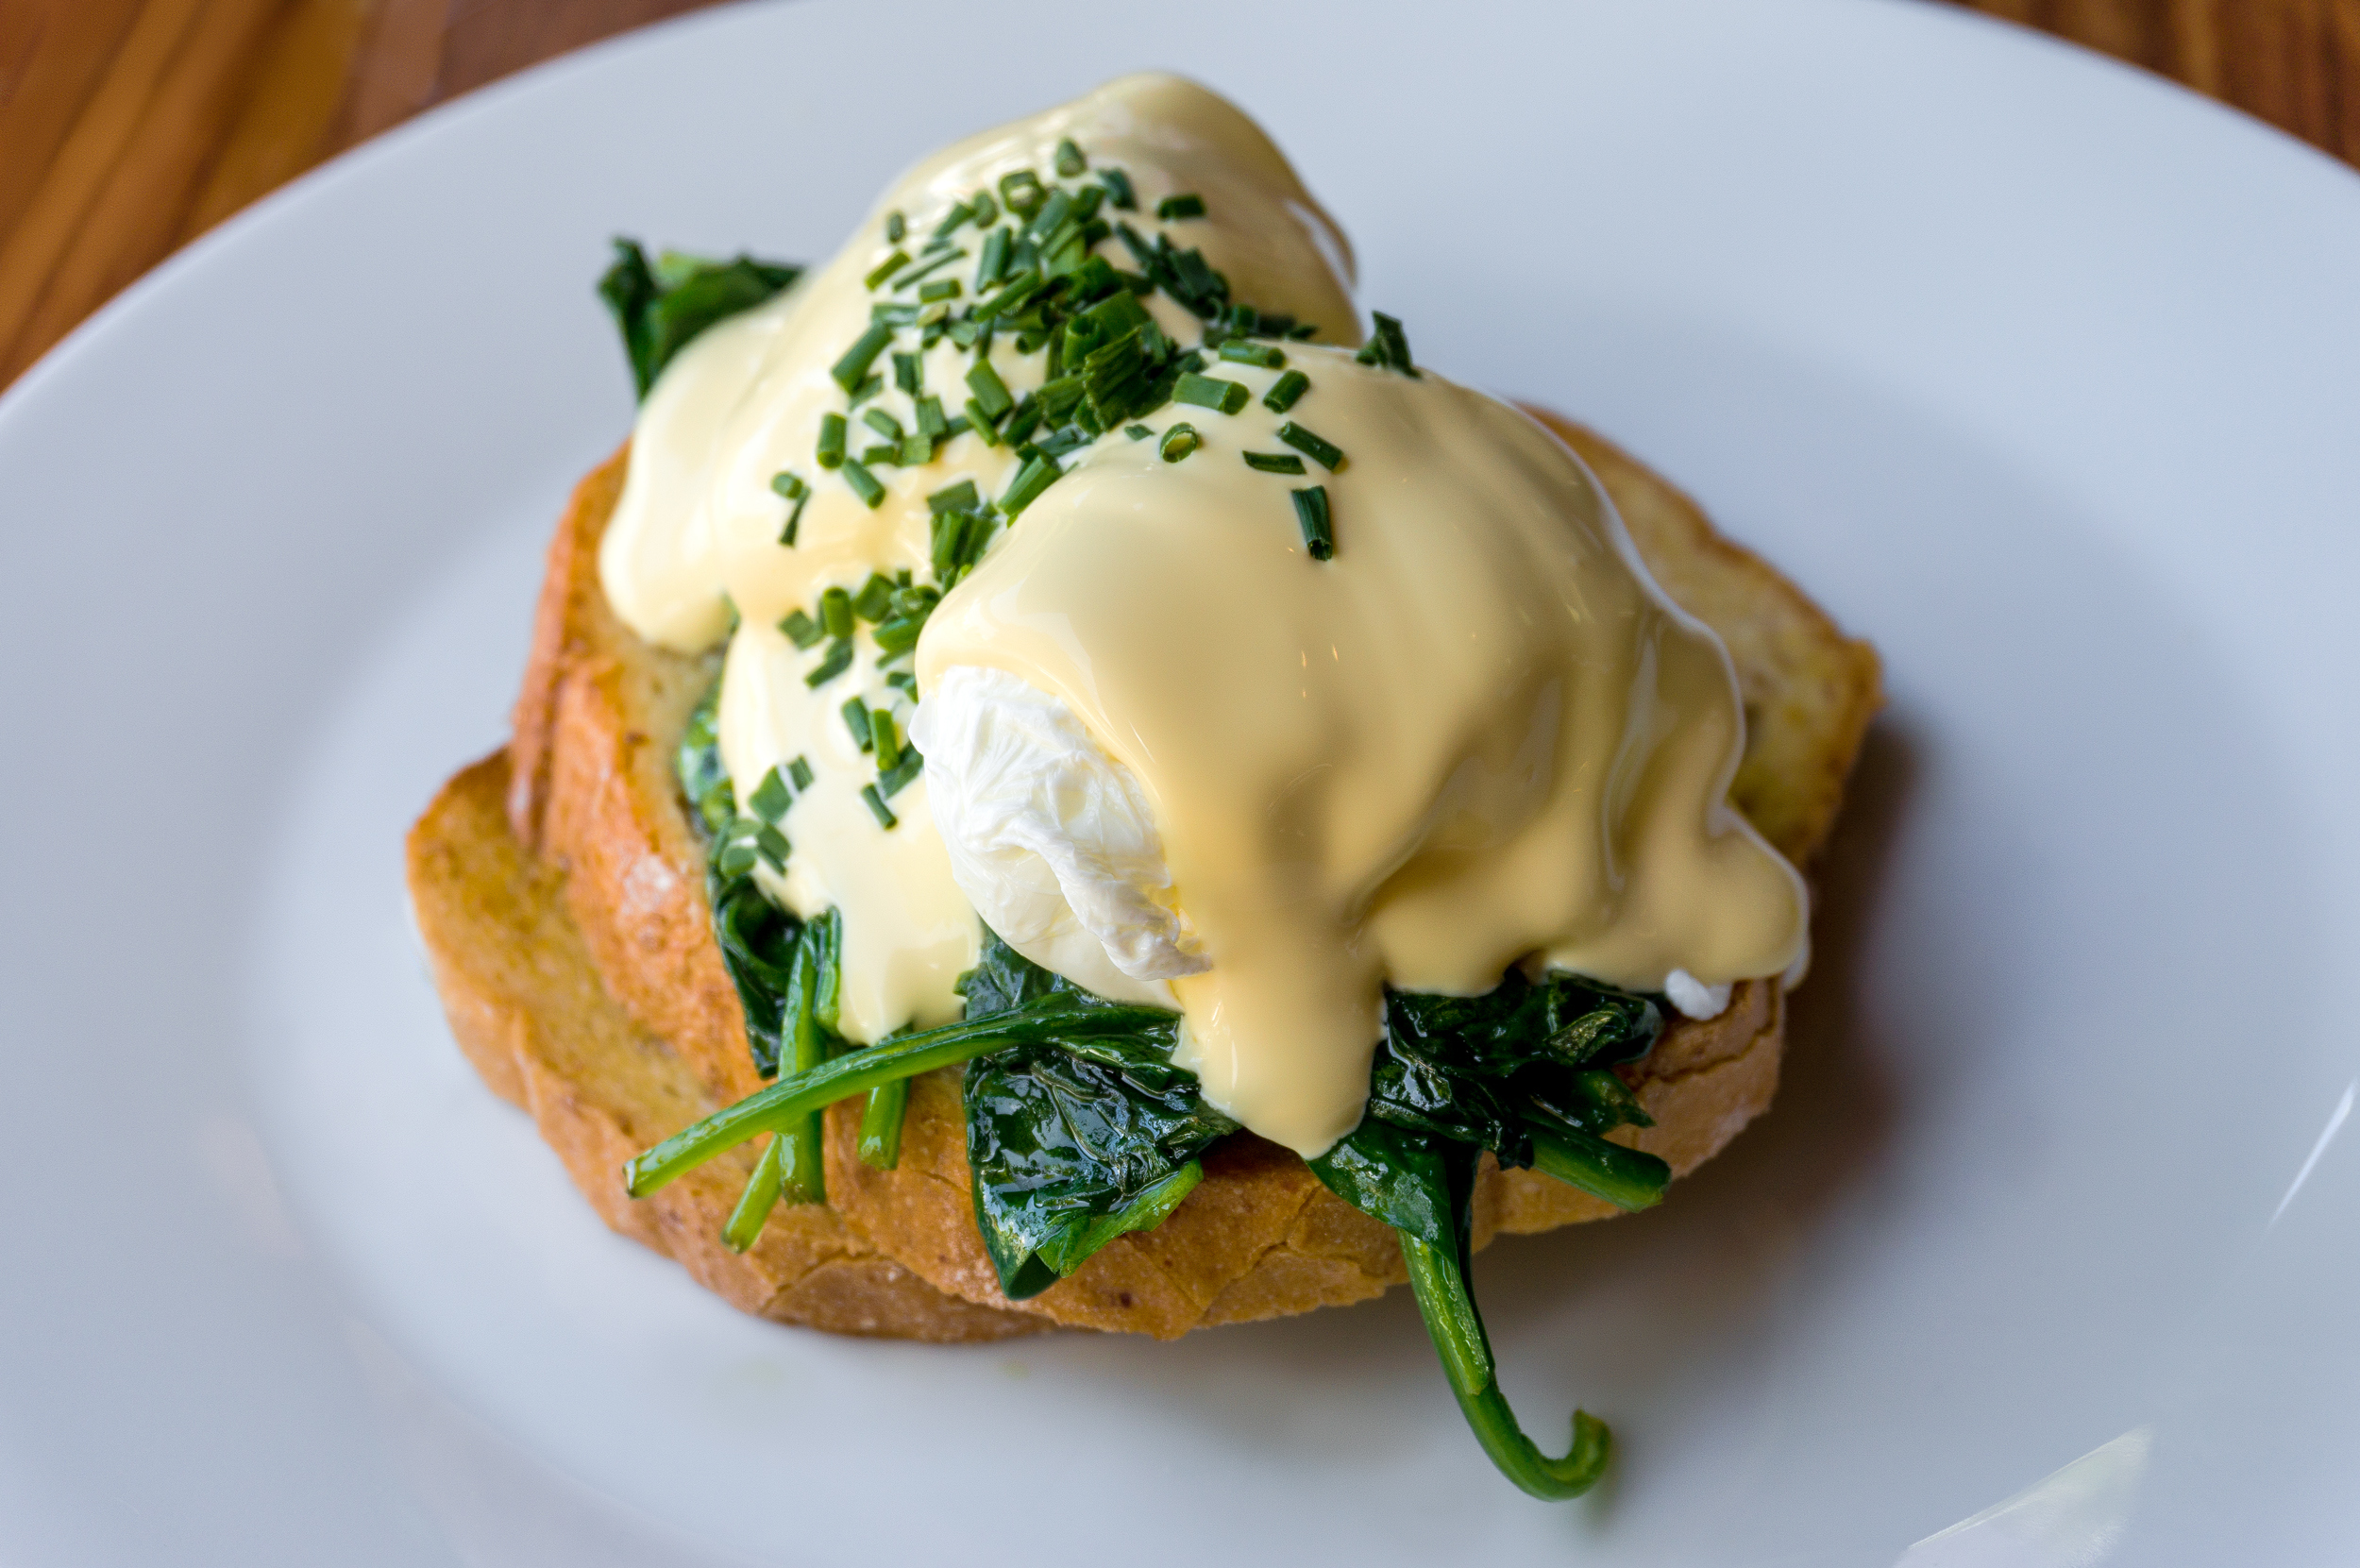 Eggs Benedict with spinach on toast. Poached egg on toast with spinach and chives on white plate. Healthy breakfast. Selective focus, shallow dof